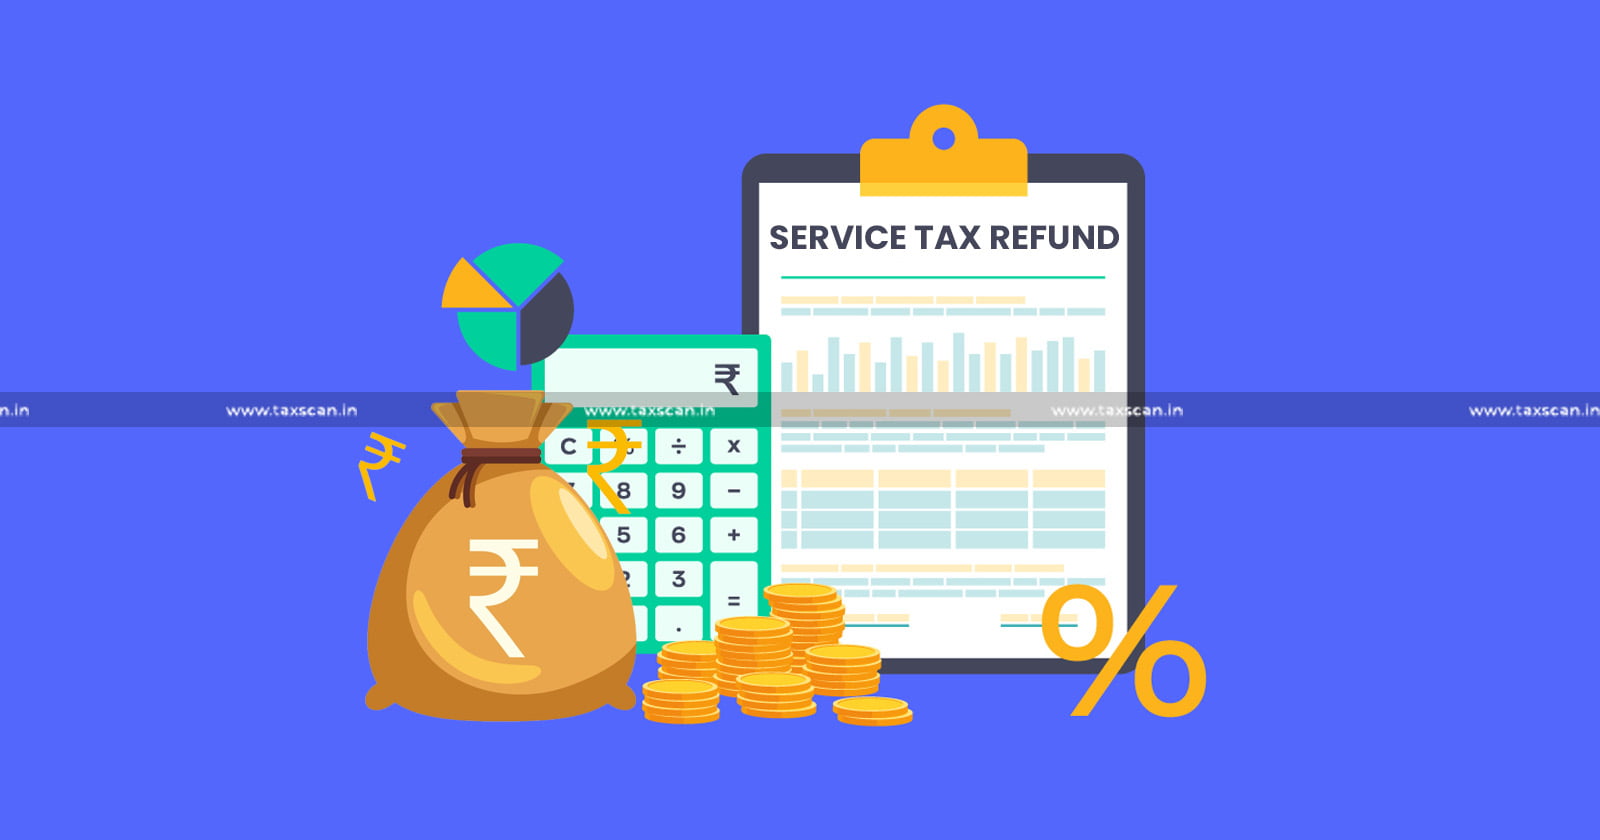 CESTAT - CESTAT upholds Rejection of Service Tax Refund - Service Tax Refund - Service Tax Refund Claim - Time Limit - Central Excise Act - Customs - Excise - taxscan